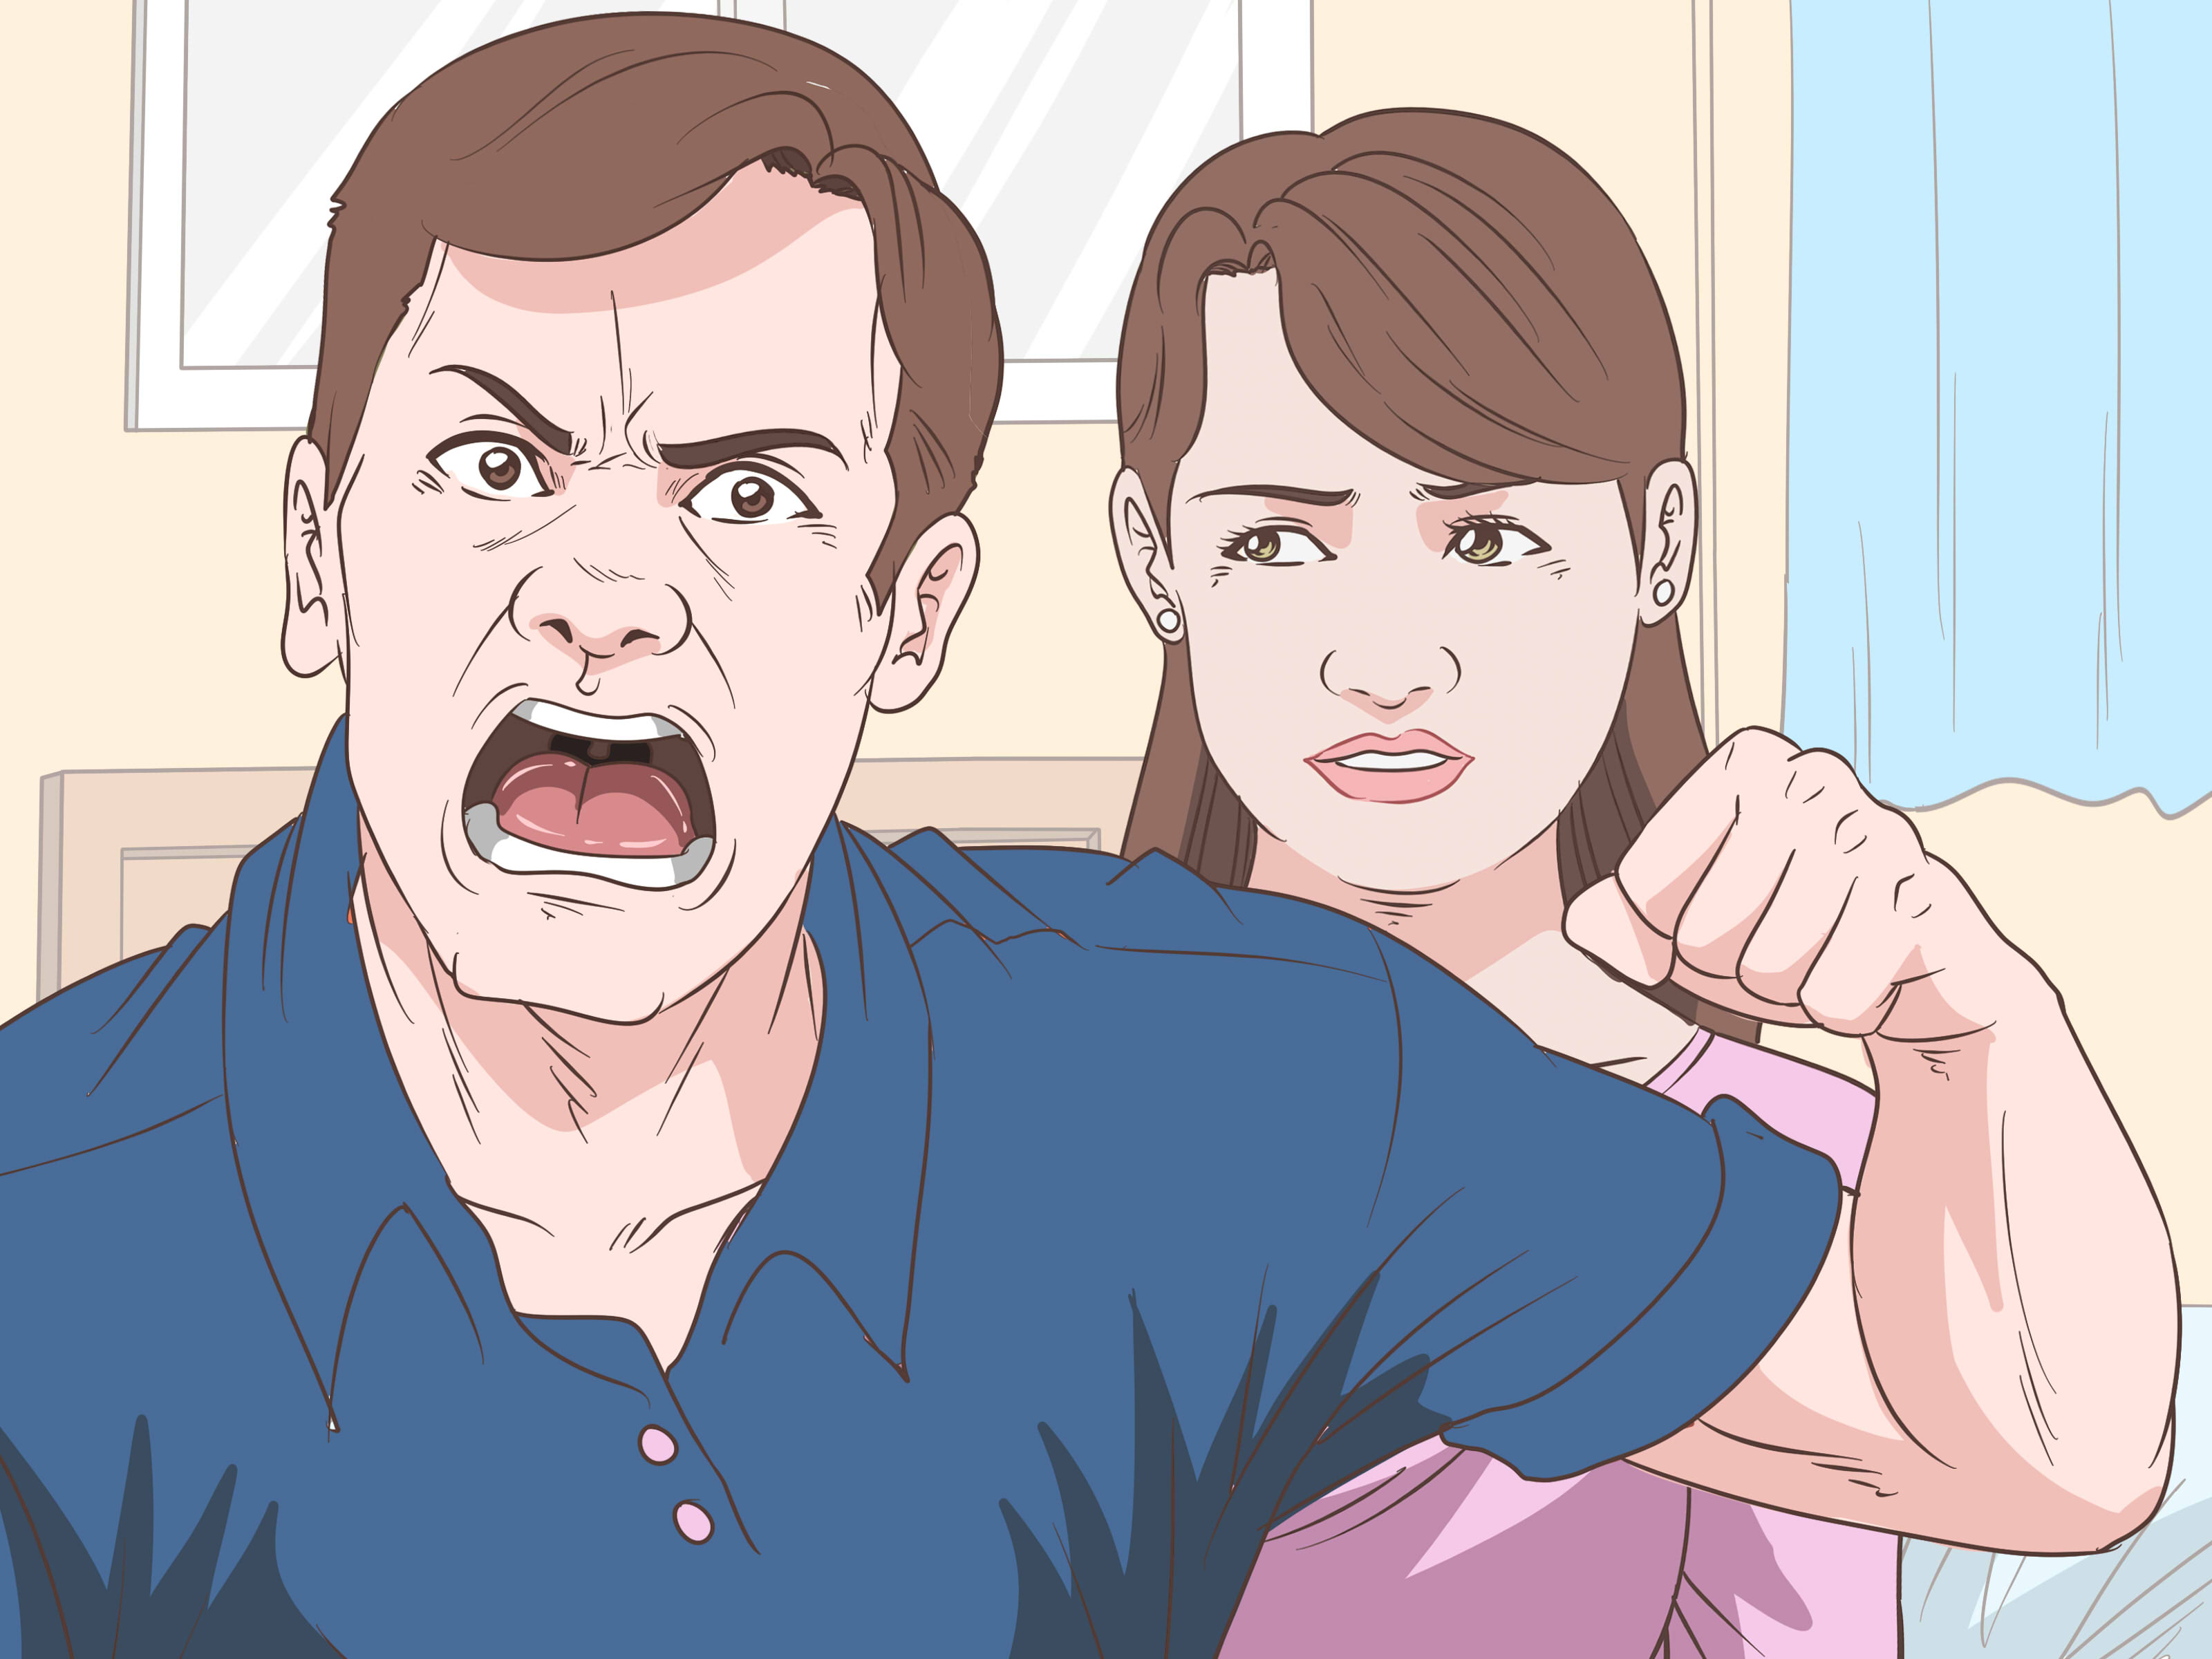 Ways To Deal With Emotional Or Verbal Abuse While Depressed